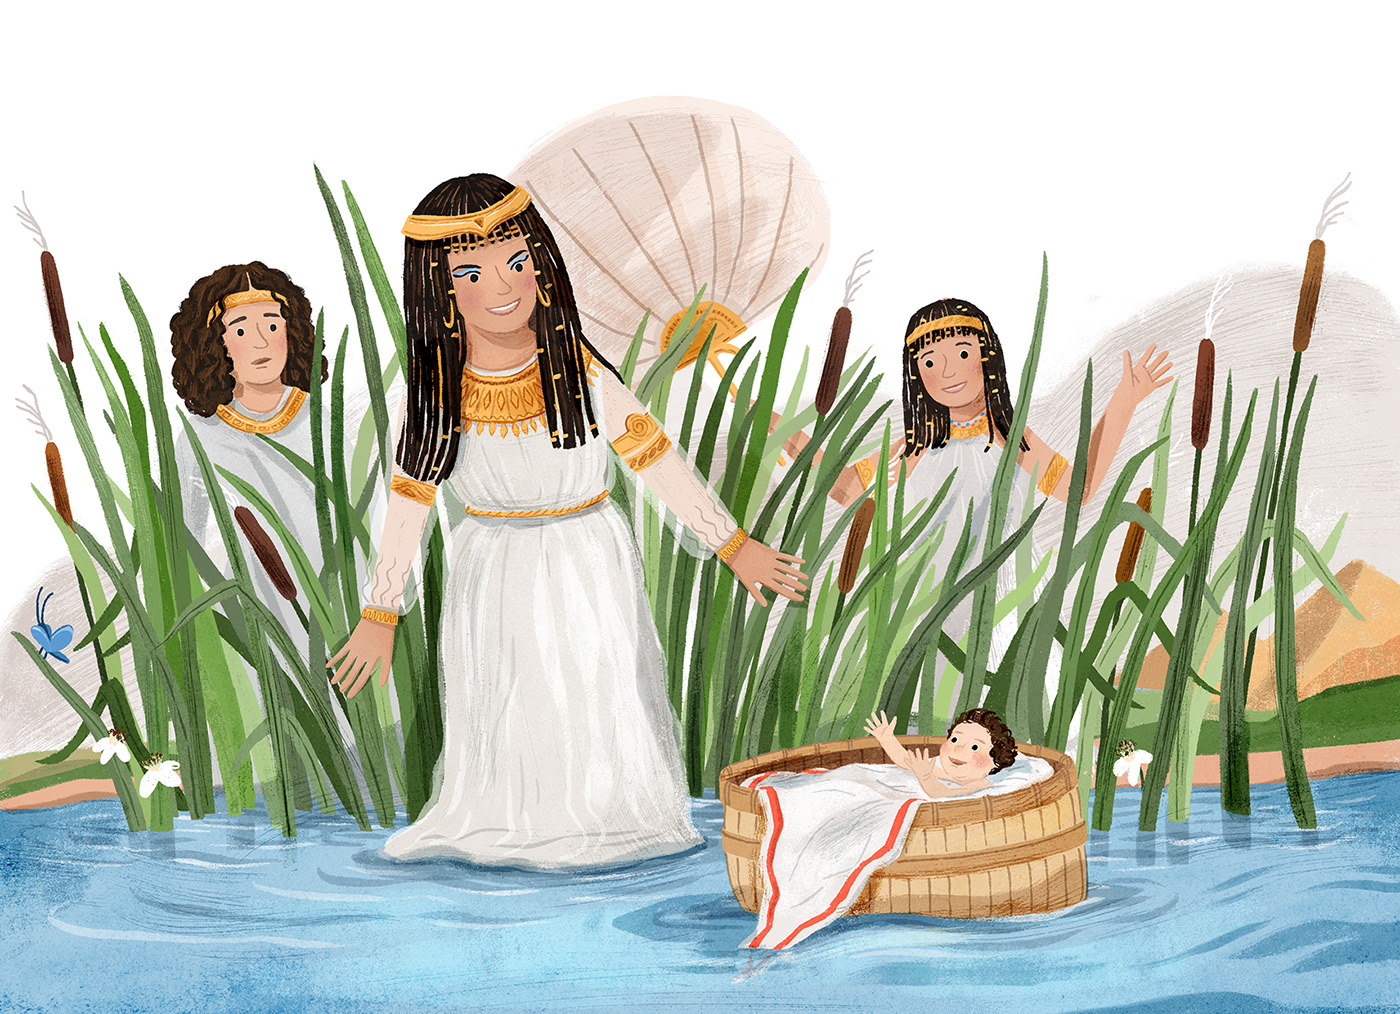 bible story children illustration children's book digital illustration kidlit kidlitart kidlitillustration moses Picture book tania rex